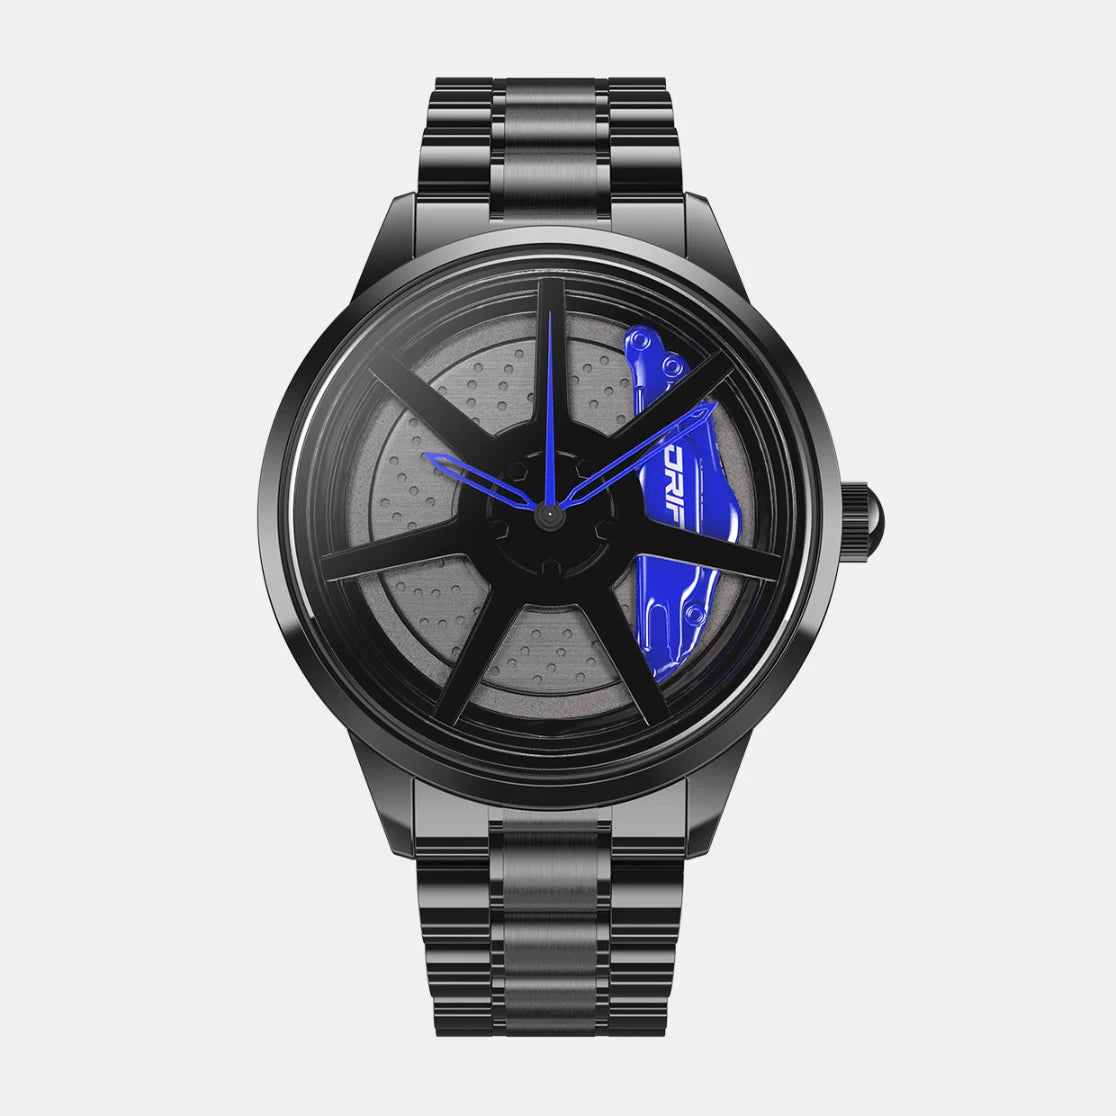 Rev up your style with our blue Drift Rim Watch! Crafted by a German startup, these precision watches showcase pioneering design, tailored to captivate motorsport, tuning, and auto enthusiasts. #id_46744374640970